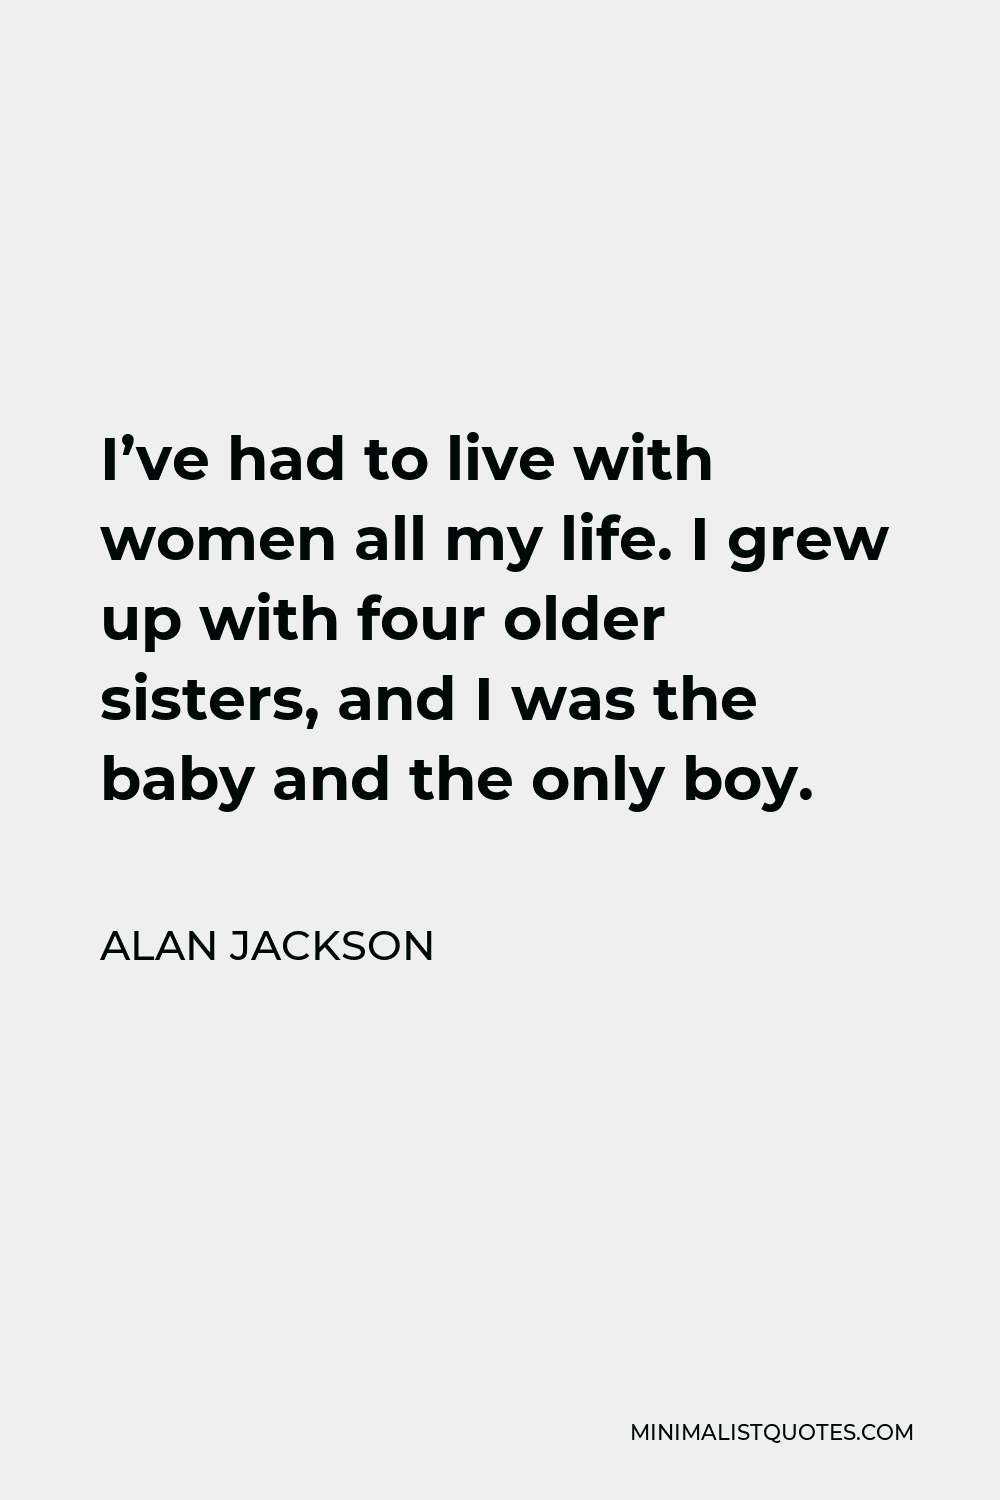 Alan Jackson Quote - I’ve had to live with women all my life. I grew up with four older sisters, and I was the baby and the only boy.